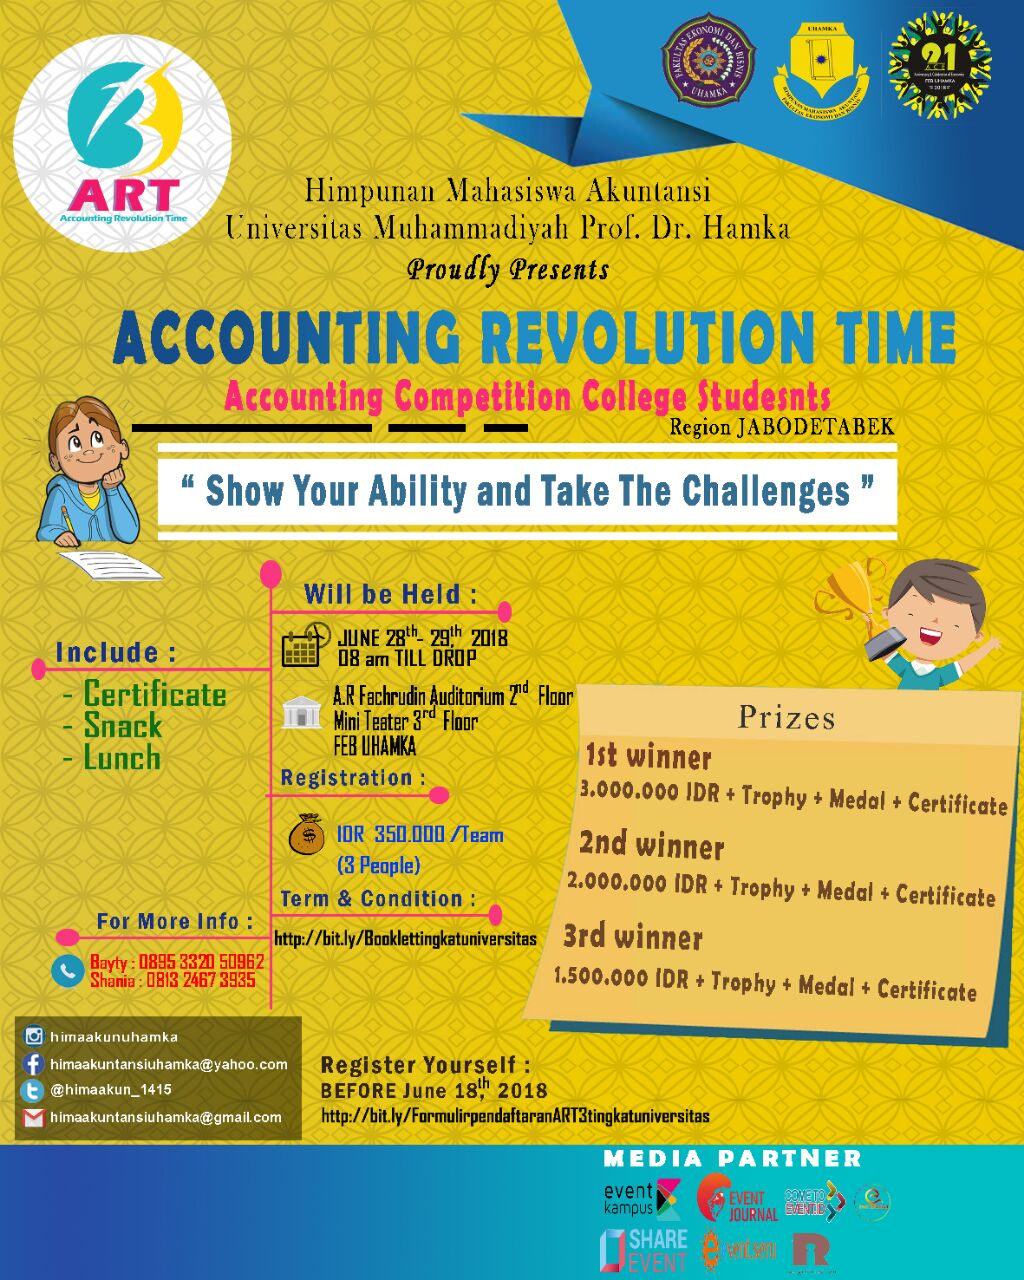 Poster Accounting Revolution Time 3 (ART 3) College Students